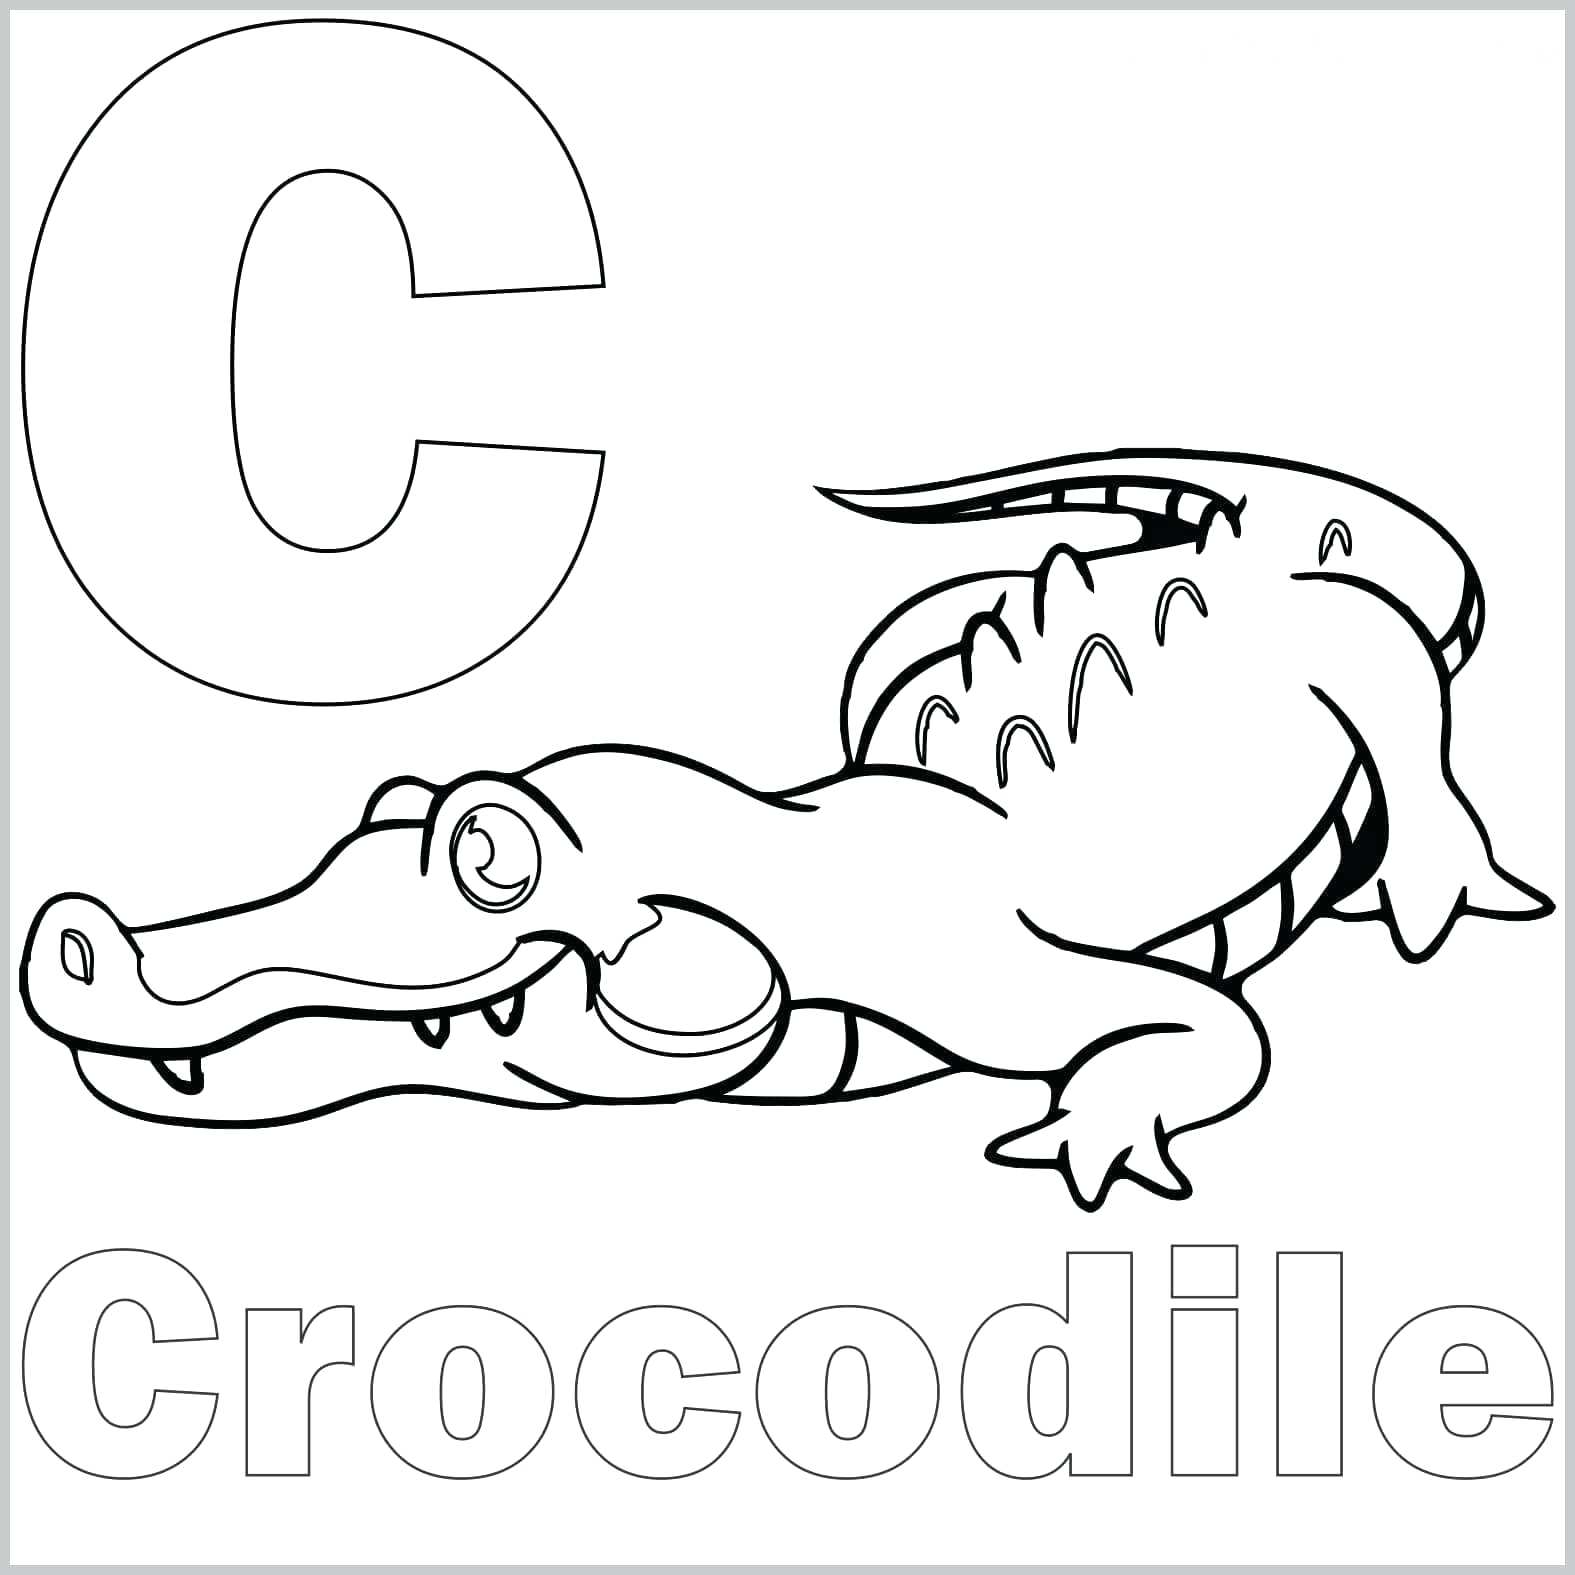 Top 30 Wicked Alligator Coloring Pages For Kids Printable Image ...